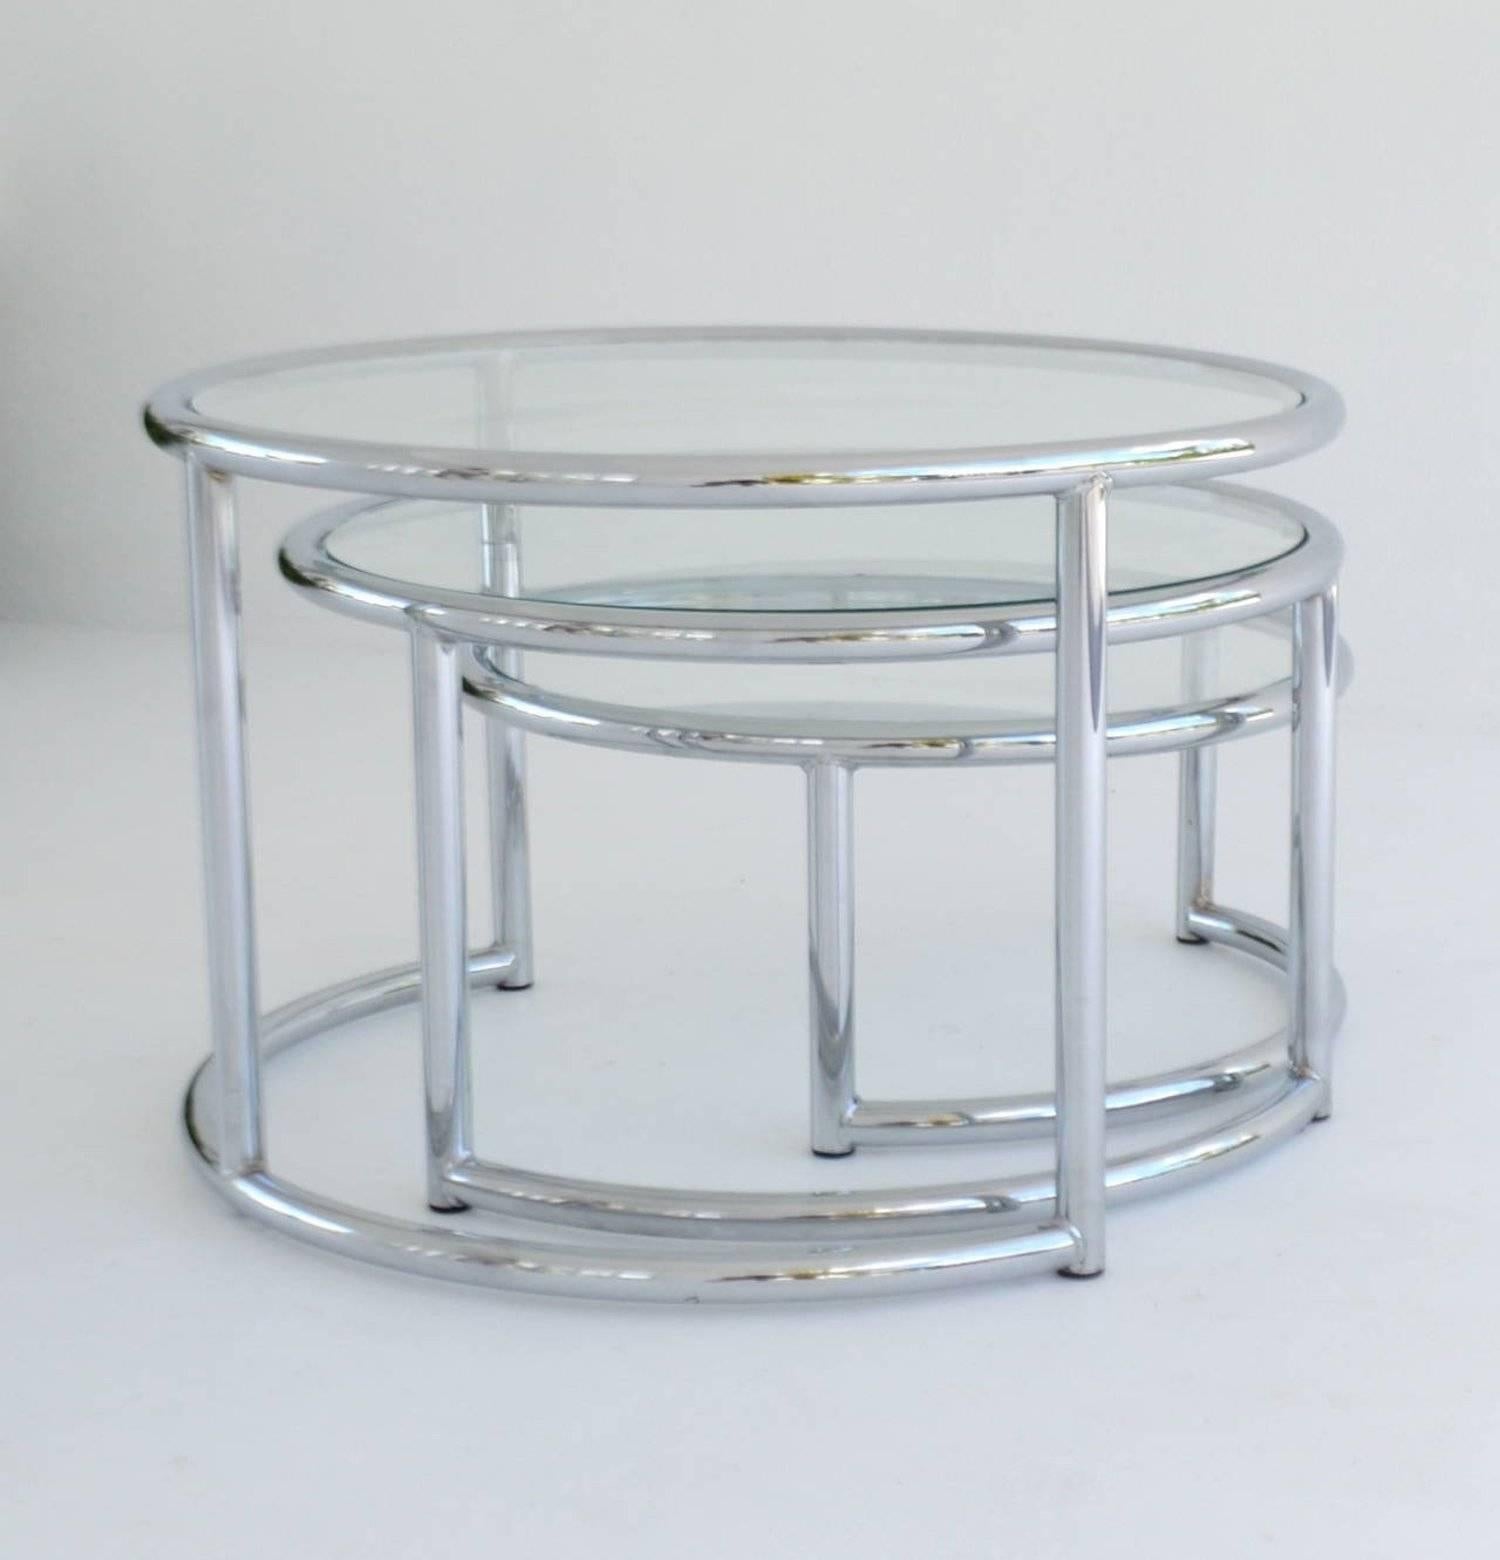 Late 20th Century Midcentury Chrome Three-Tier Cocktail or Side Table For Sale